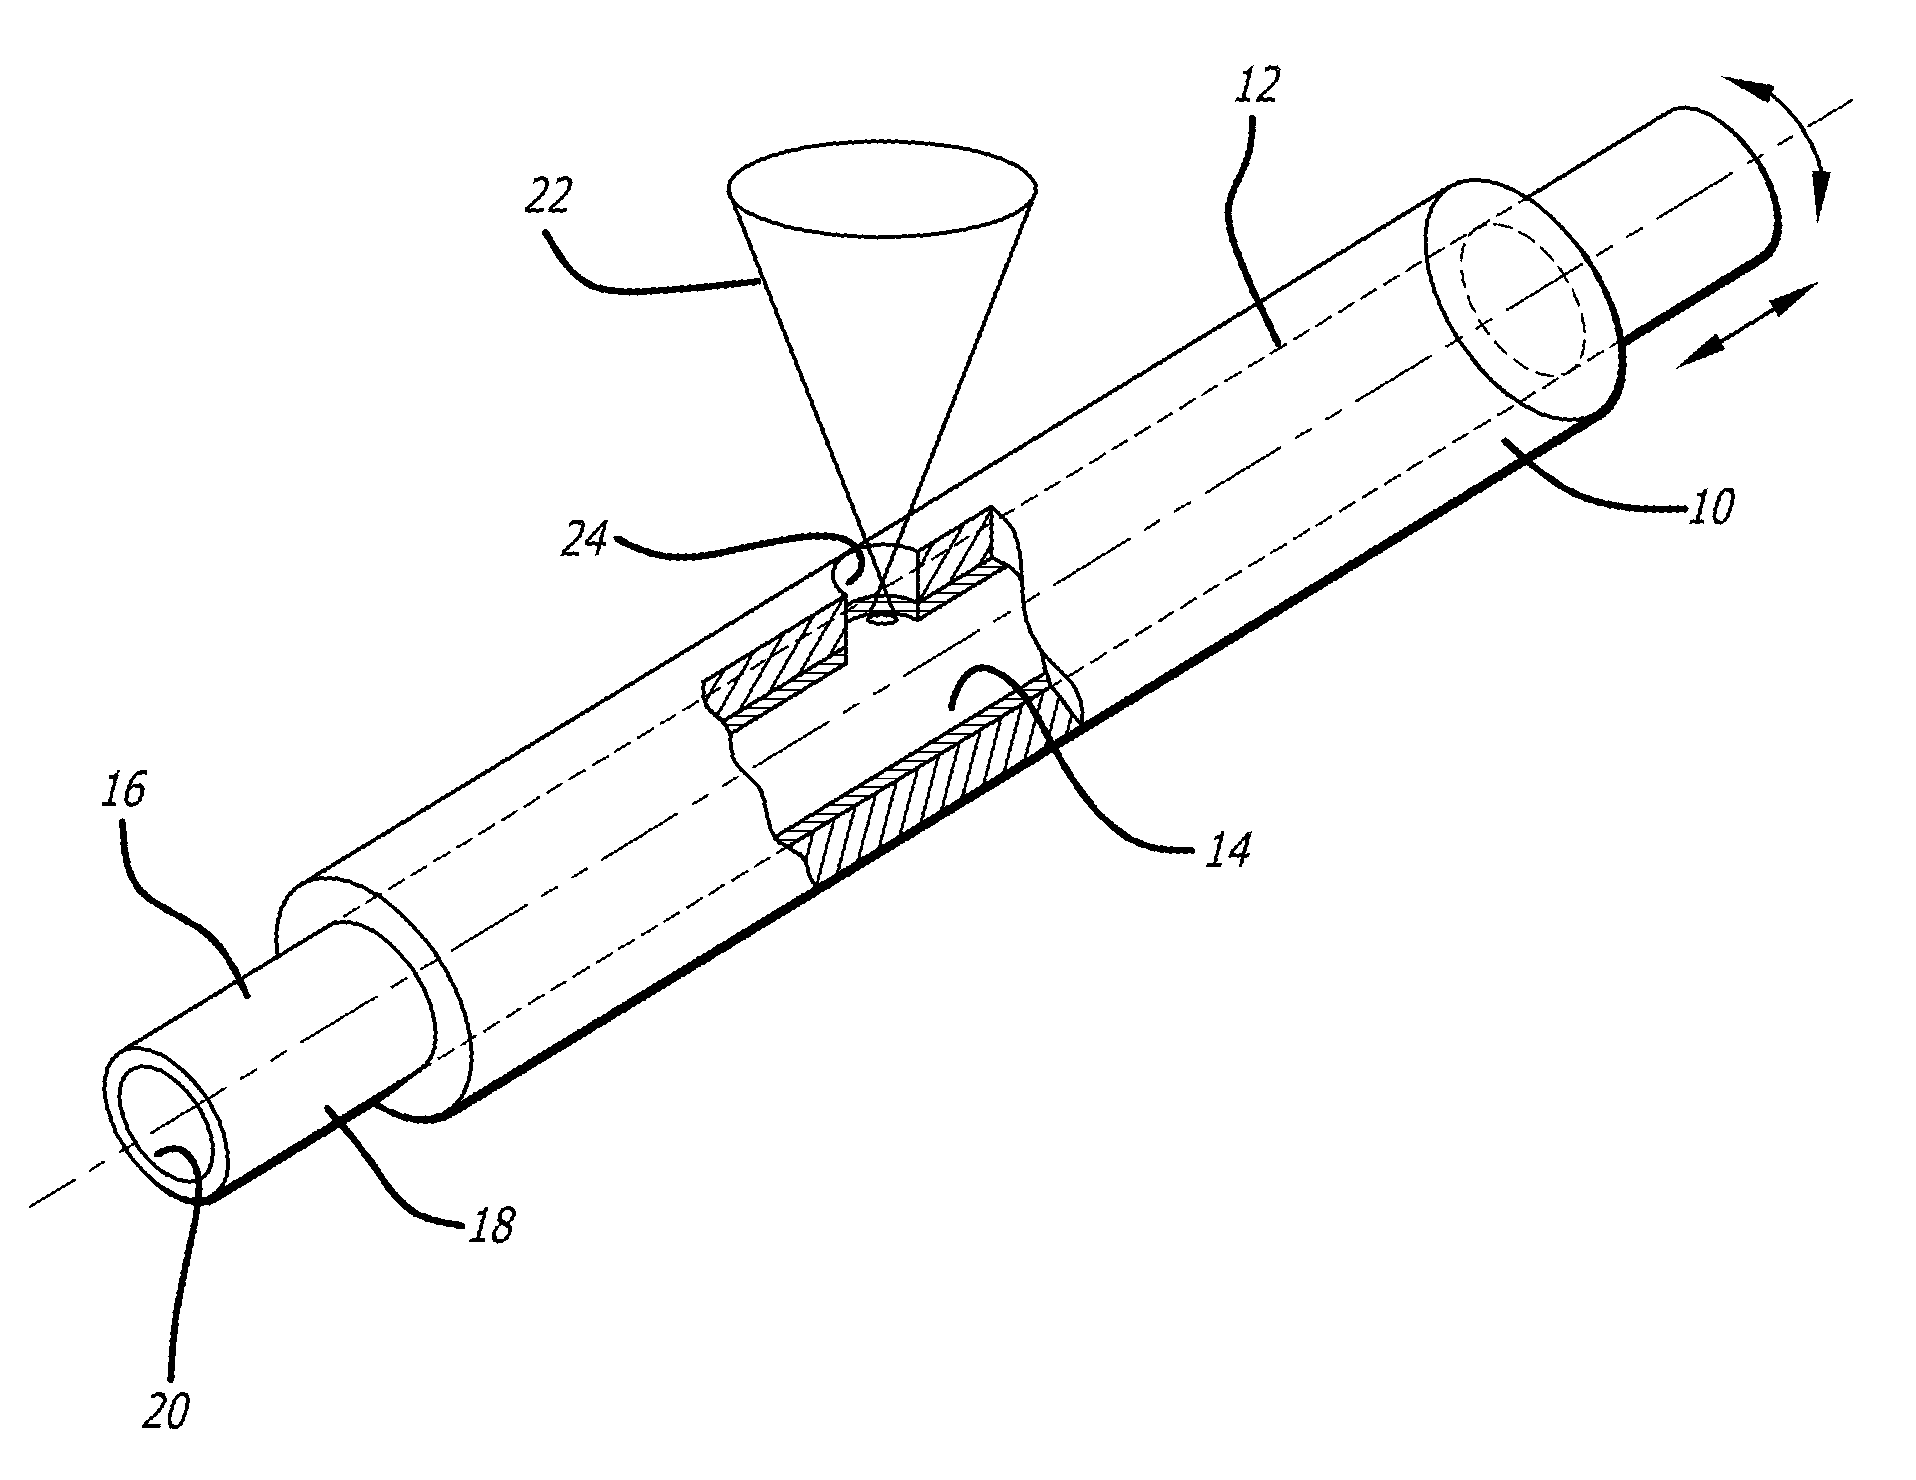 Methods and systems for laser cutting and processing tubing to make medical devices